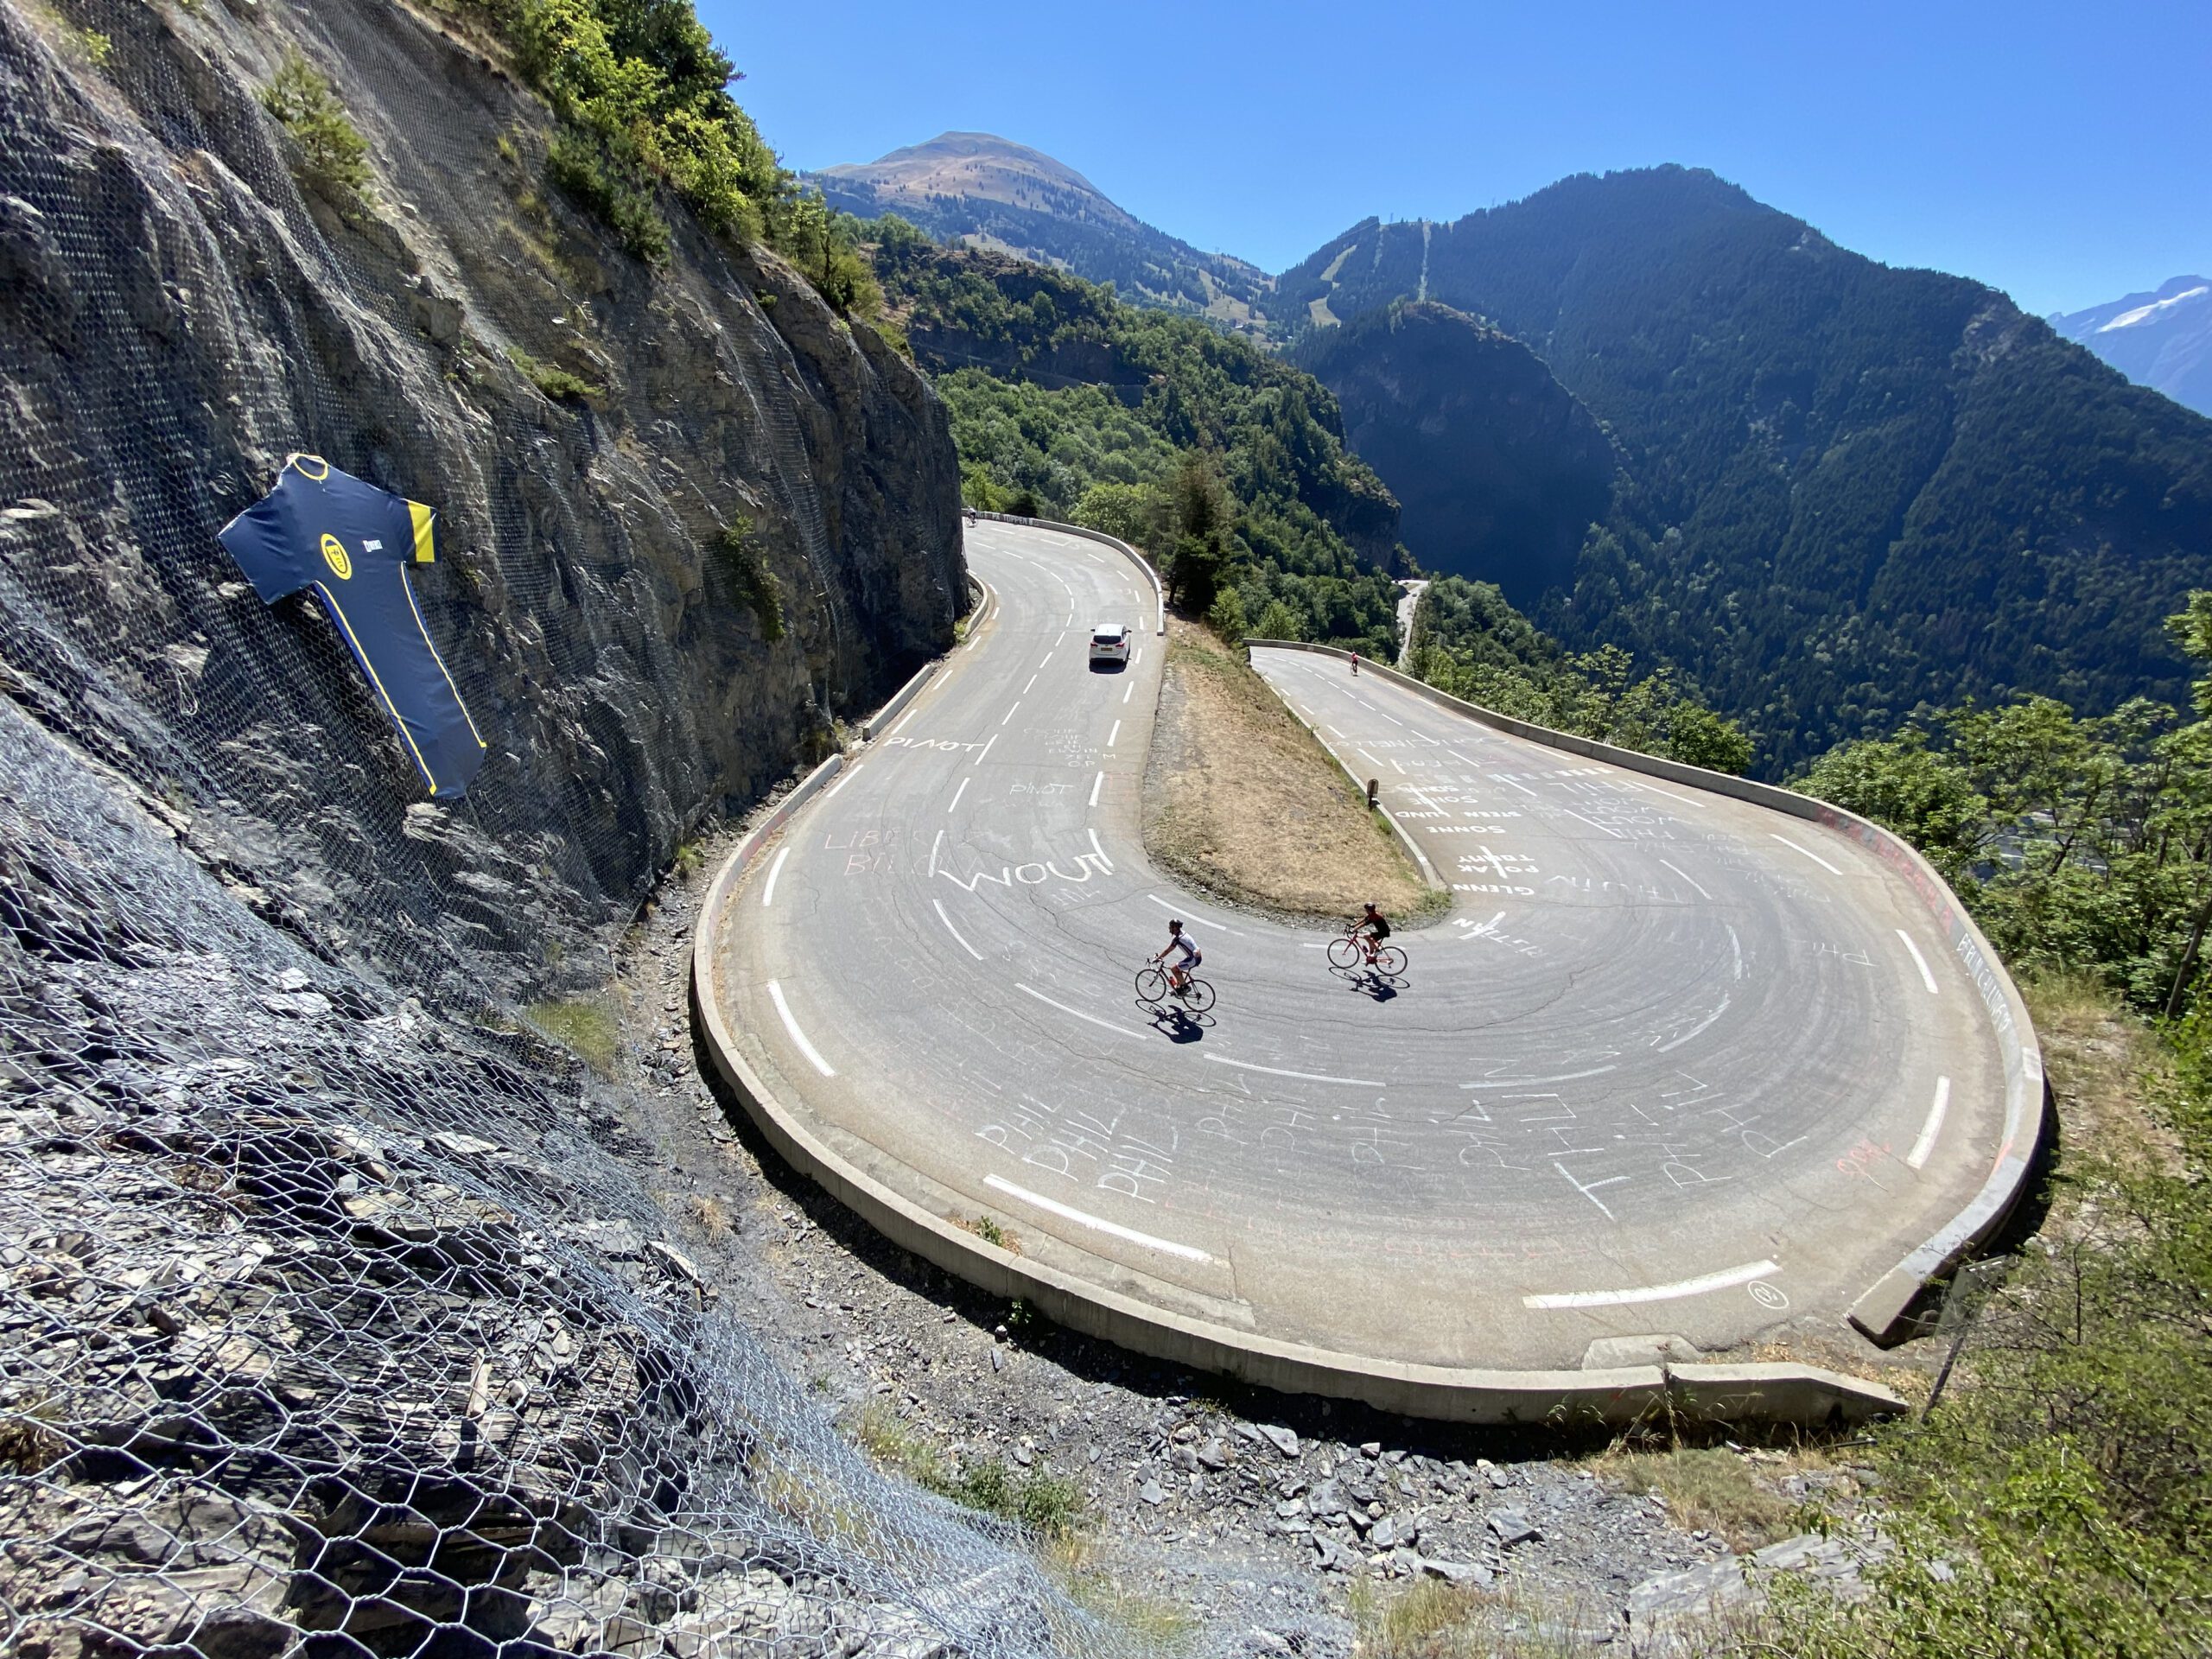 A switchback on the road leading to Alpe d'Huez with two cyclists